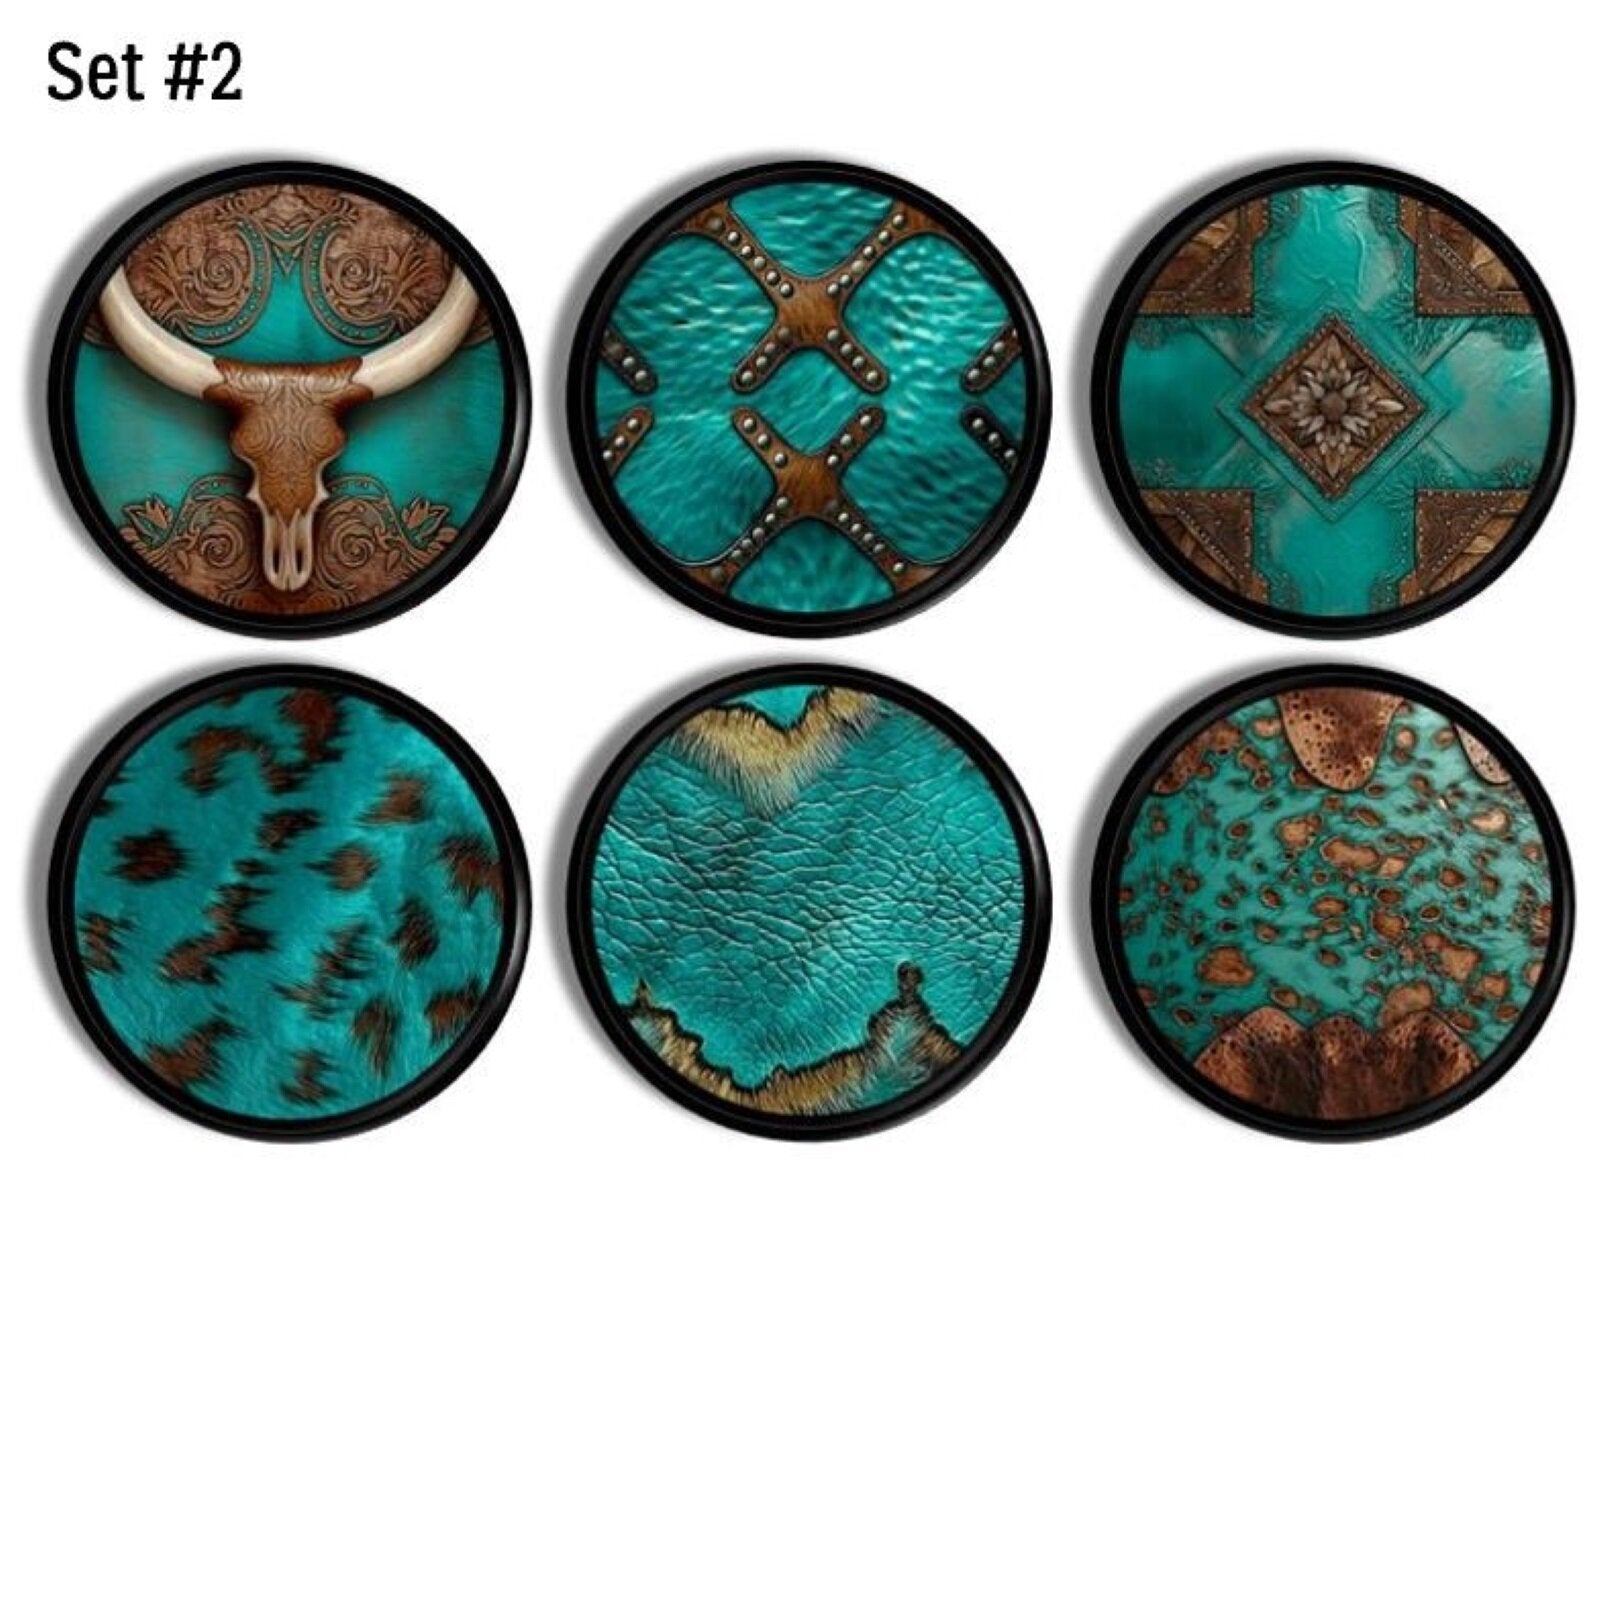 Set of 6 handmade cabinet door knobs in a western cattle ranch theme on black handles.